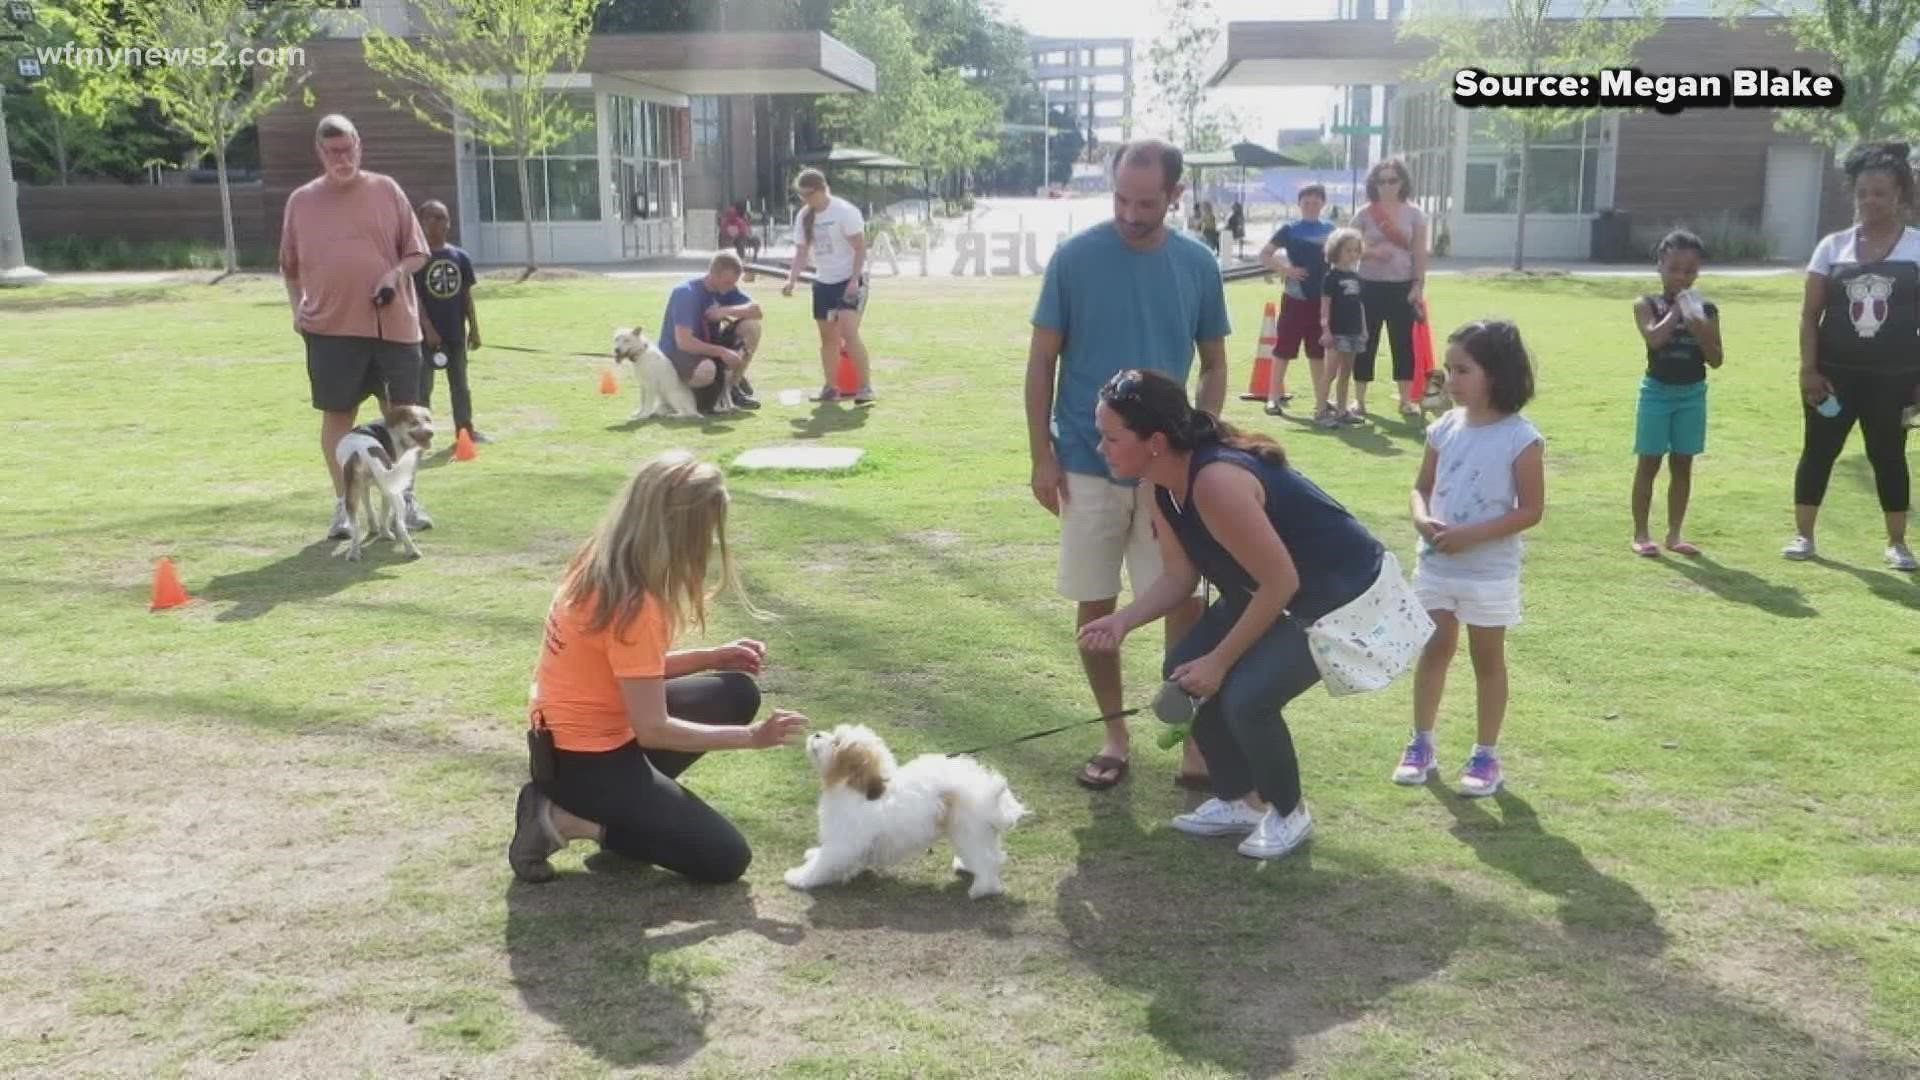 Megan Blake has captured national attention with her dog training techniques.